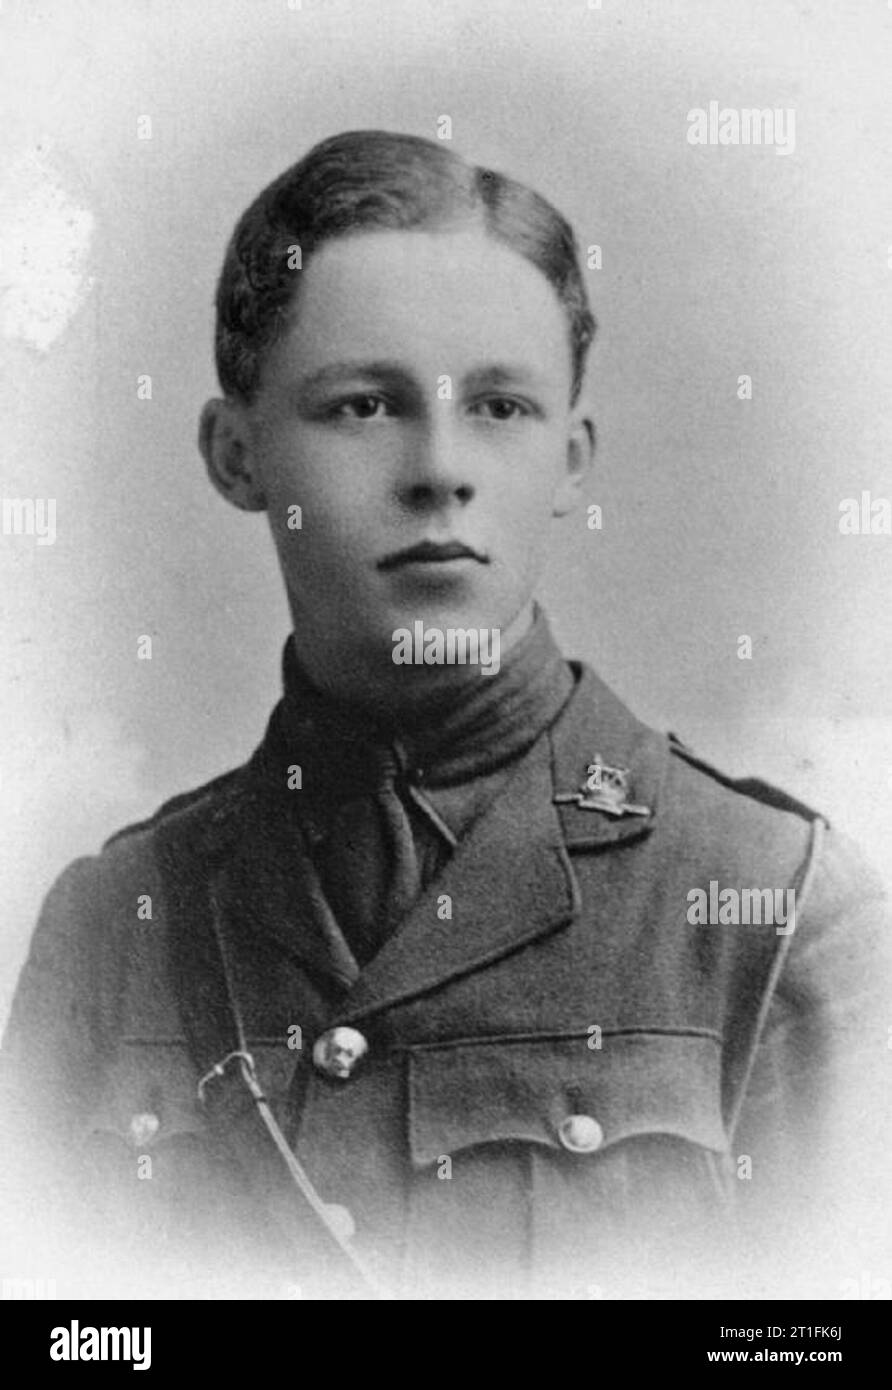 . 3 Battalion (attached 1 Battalion), Queen's Own (Royal West Kent Regiment) Lt Dobie was educated at Marlborough School and received his commission in September 1914. He was killed in action, aged 20, on 9 April 1916 near Arras. Lt Dobie is buried at Faubourg d'Amiens Cemetery, Arras. Faces of the First World War Find out more about this First World War Centenary project at www.1914.org/faces. This image is from IWM Collections. Stock Photo